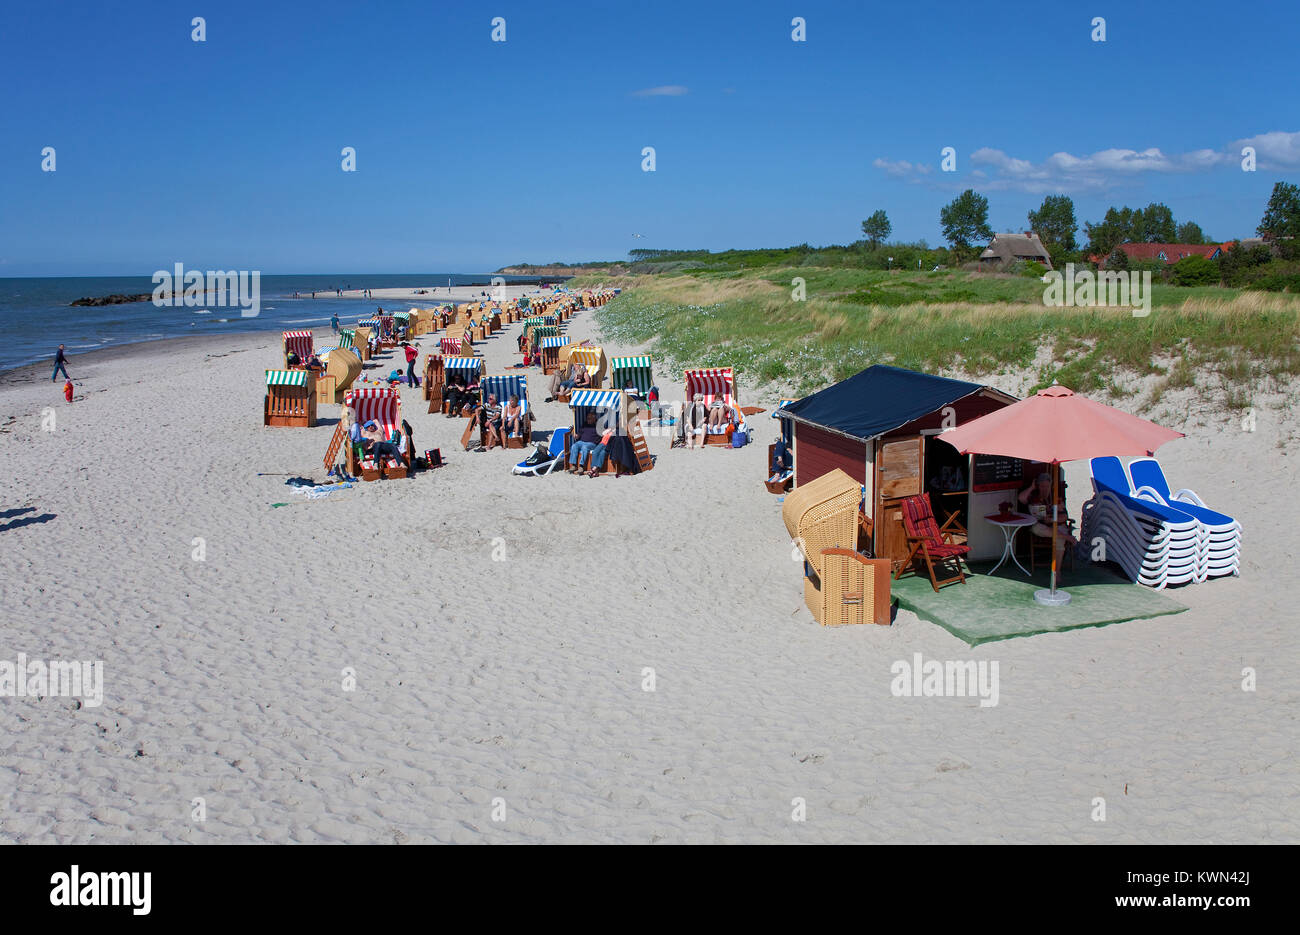 Beach chair and sunbed rental, station at the beach of Wustrow, Fishland, Mecklenburg-Western Pomerania, Baltic sea, Germany, Europe Stock Photo